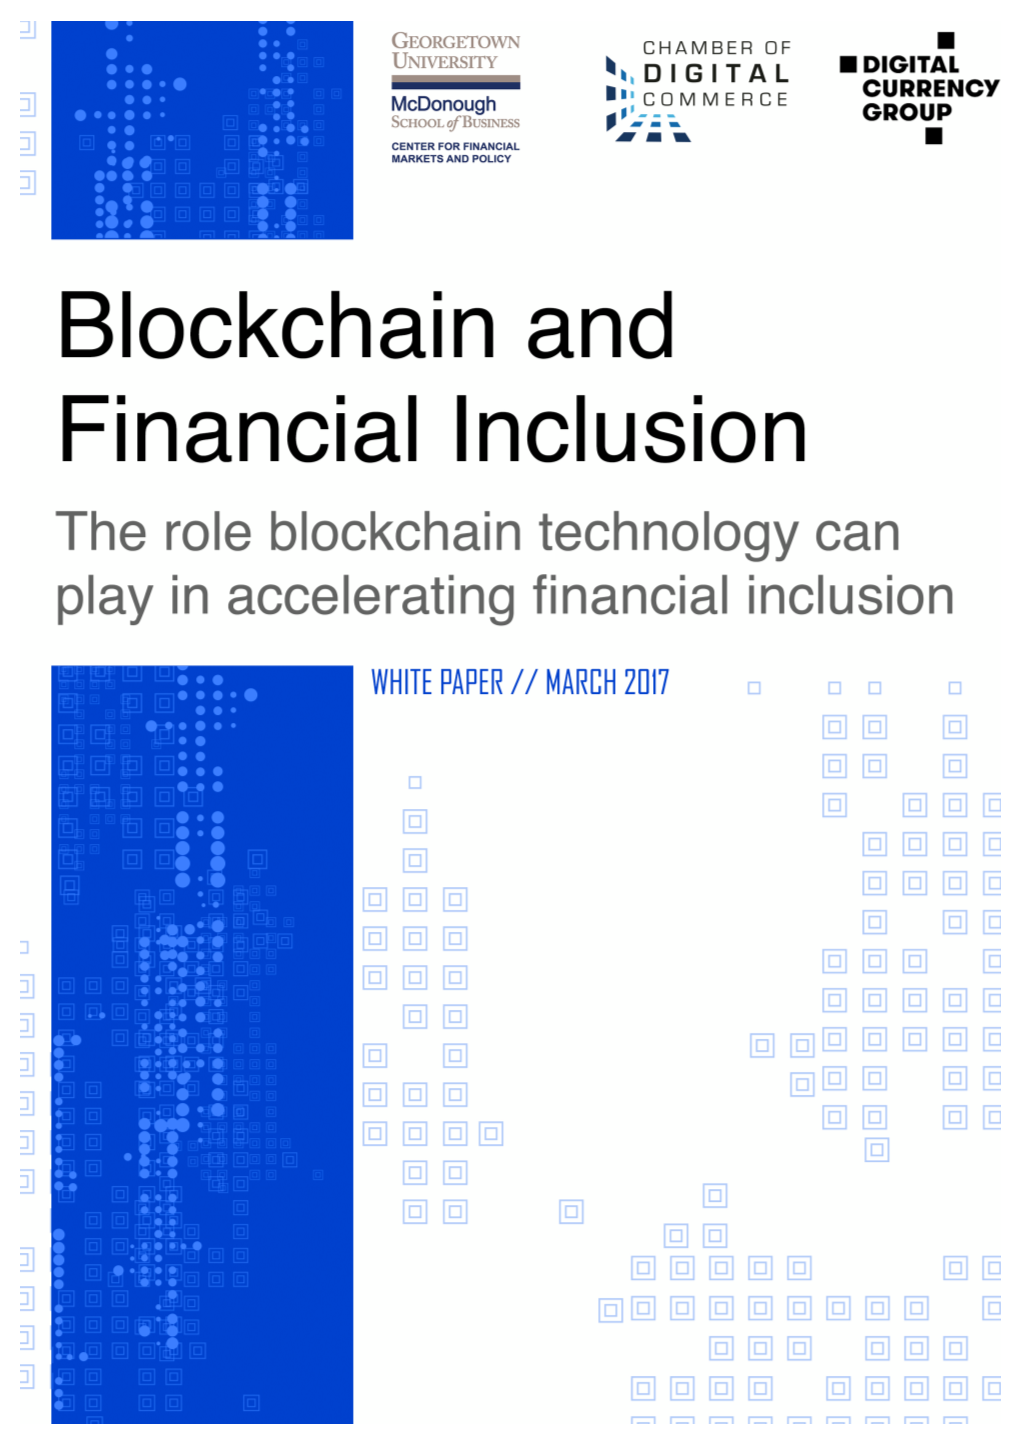 Blockchain and Financial Inclusion: the Role Blockchain Technology Can Play in Accelerating Financial Inclusion